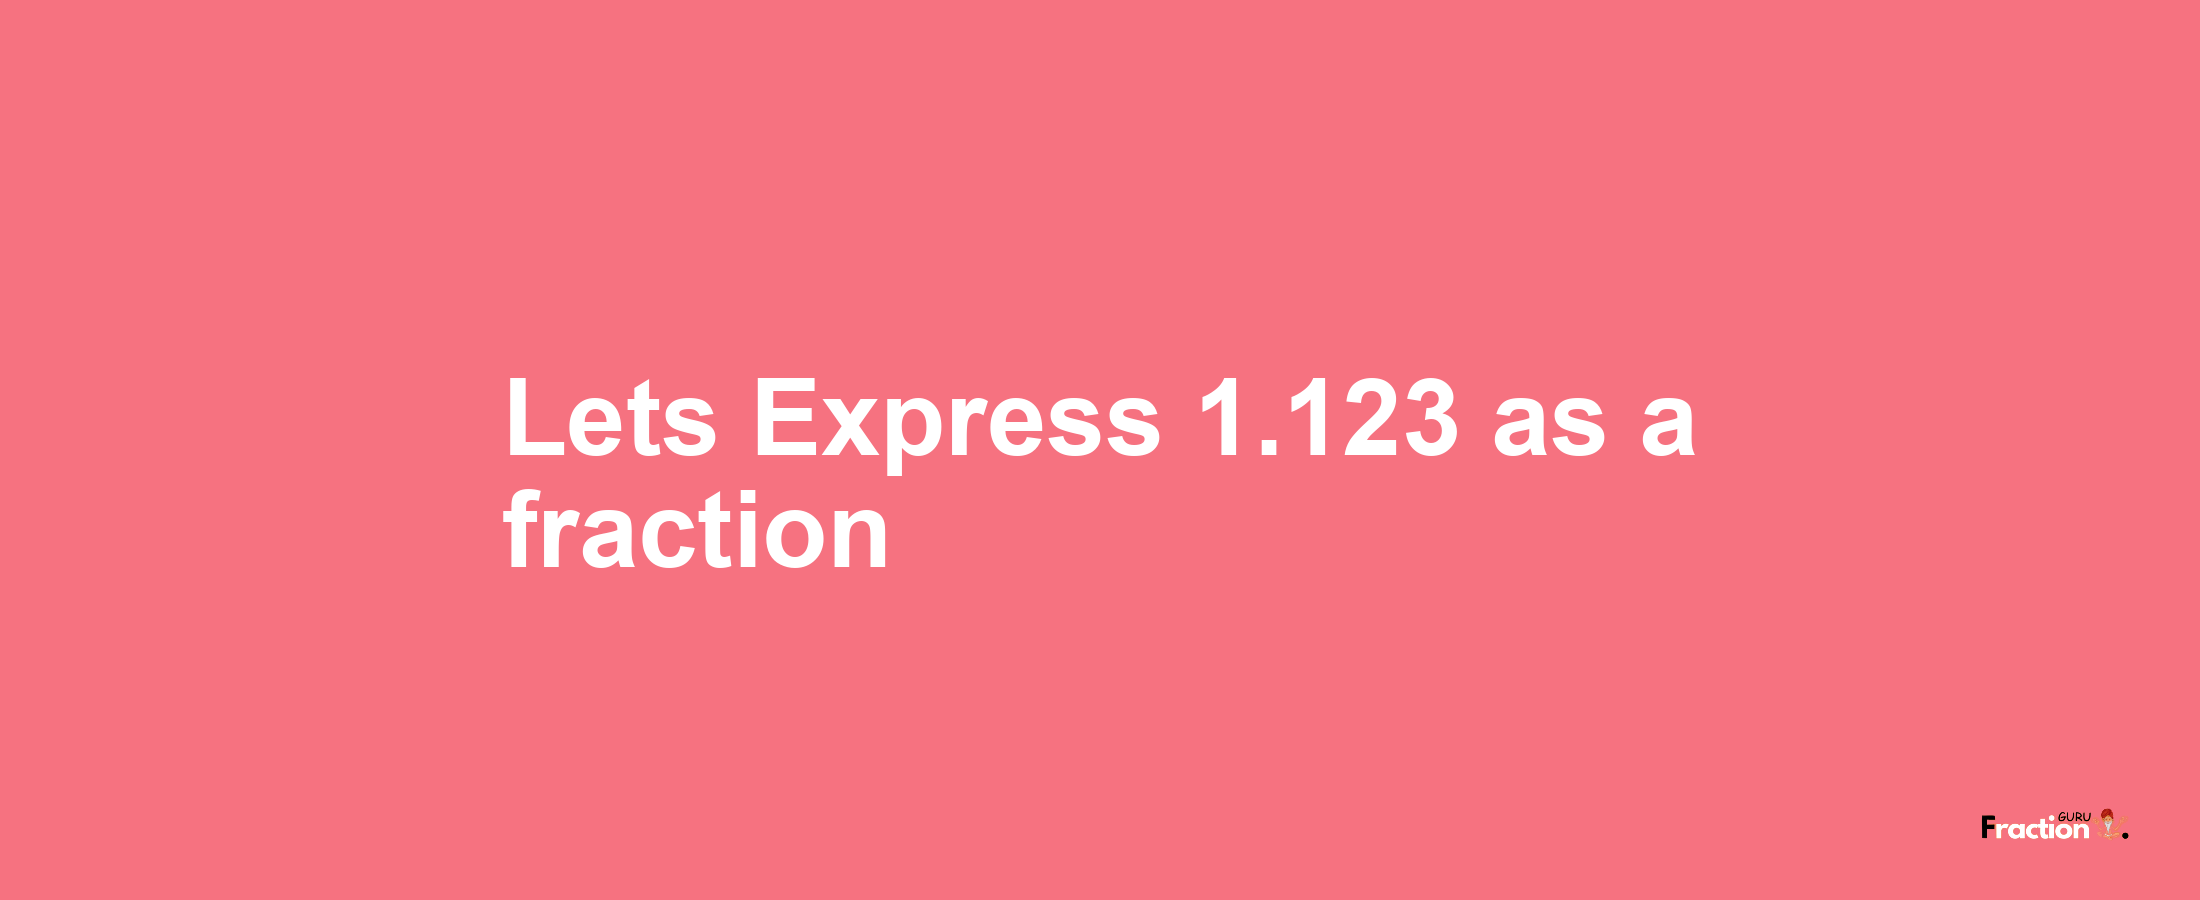 Lets Express 1.123 as afraction